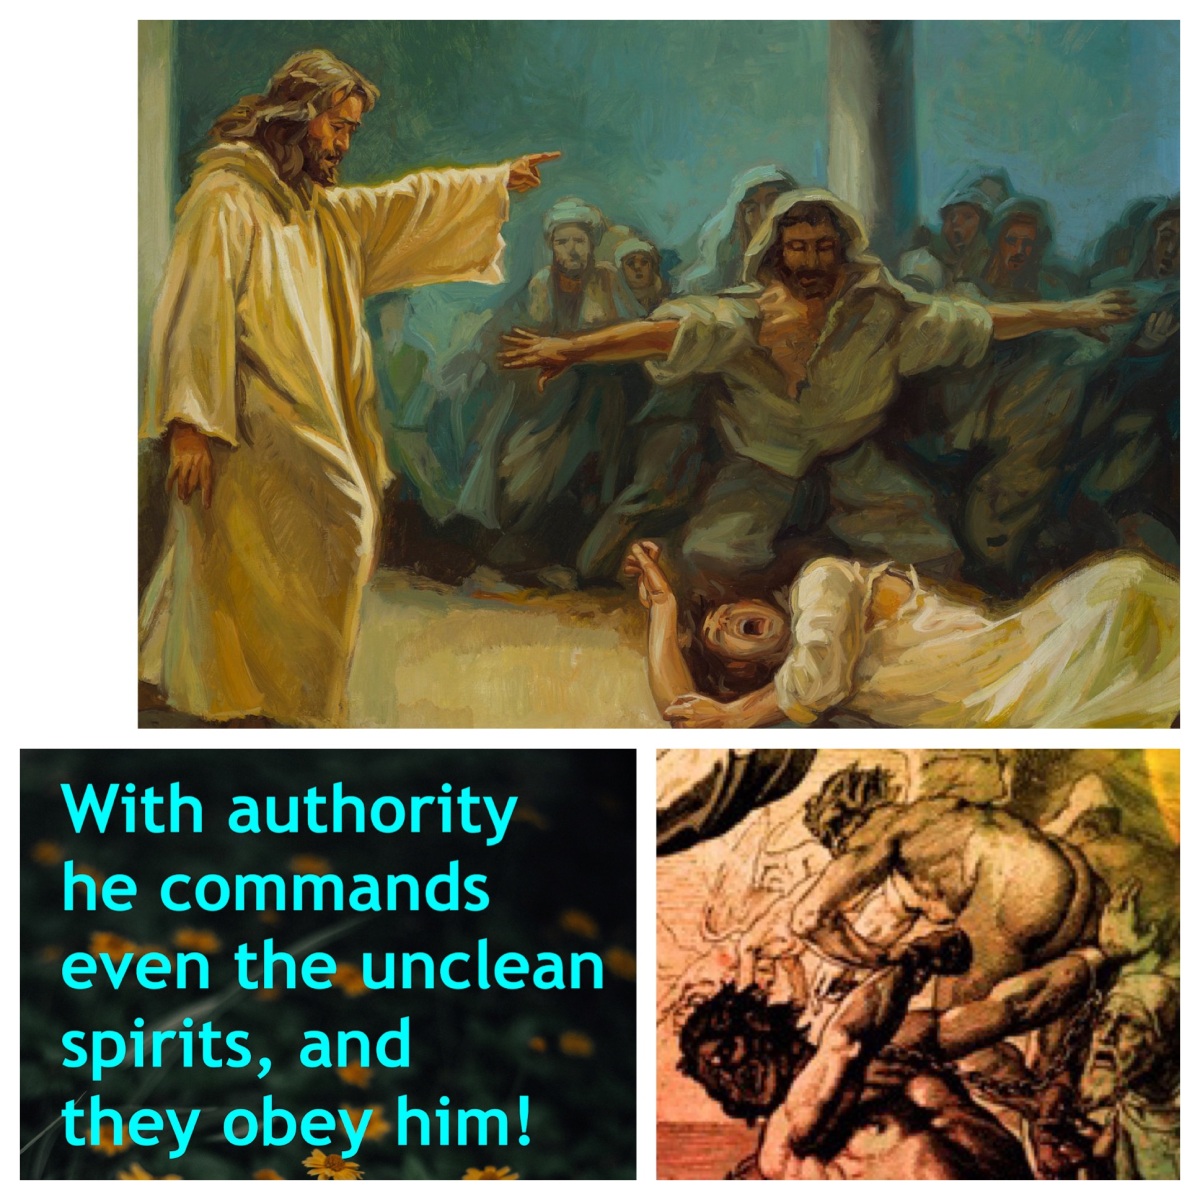 The man was convulsing and crying; the people were astounded and amazed (Mark 1; Epiphany 4B)